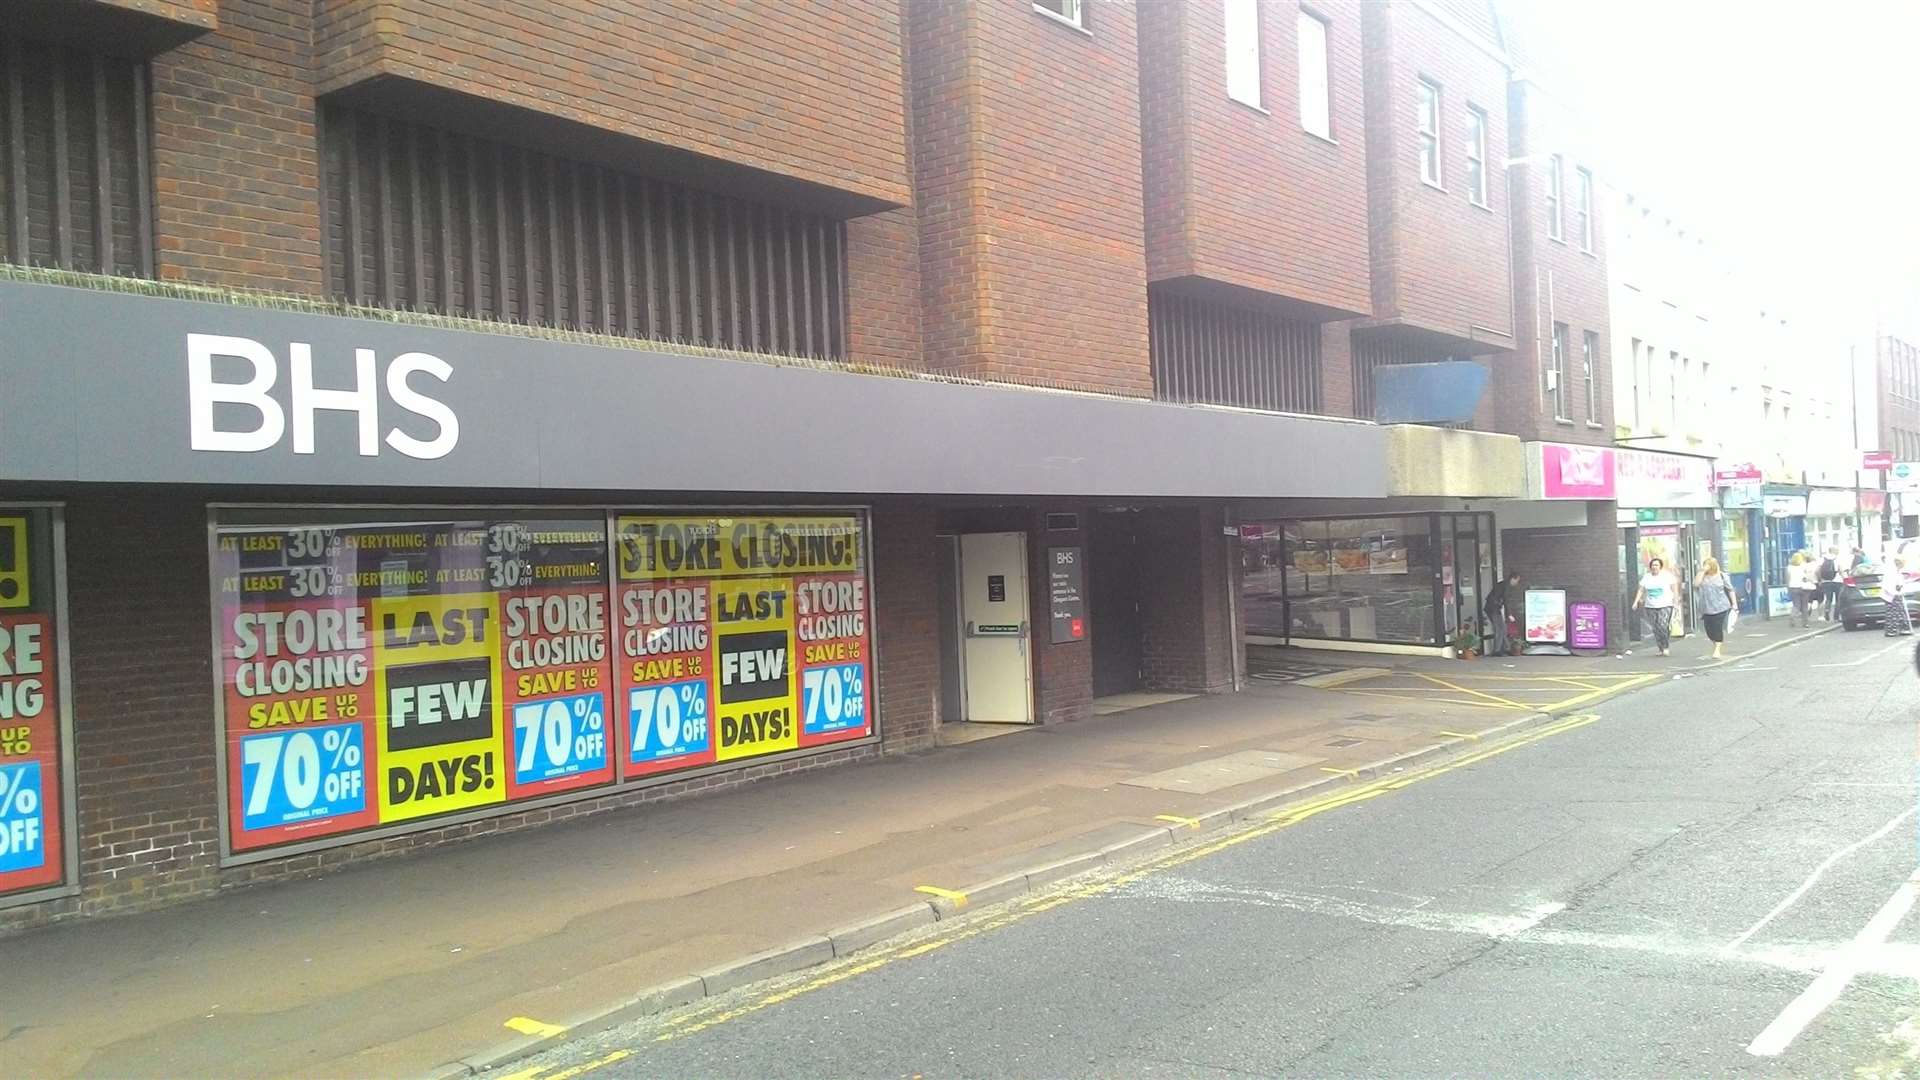 The BHS in Maidstone prior to its closure in 2016